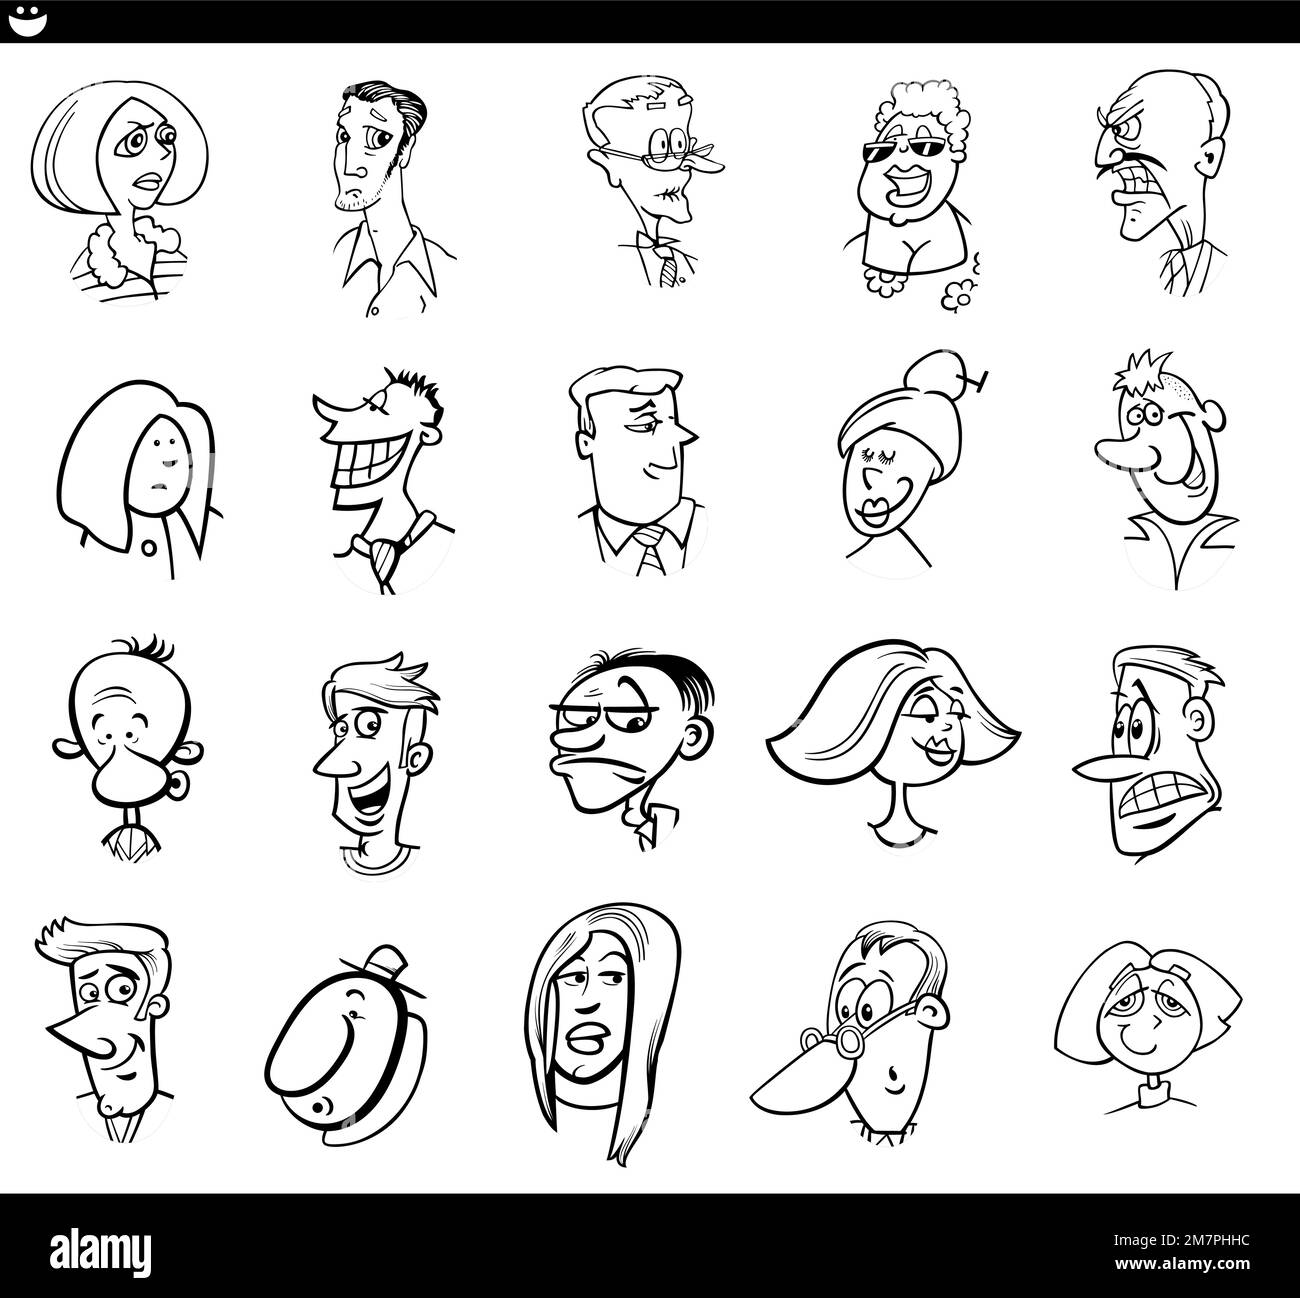 Cartoon characters emotion Black and White Stock Photos & Images - Alamy